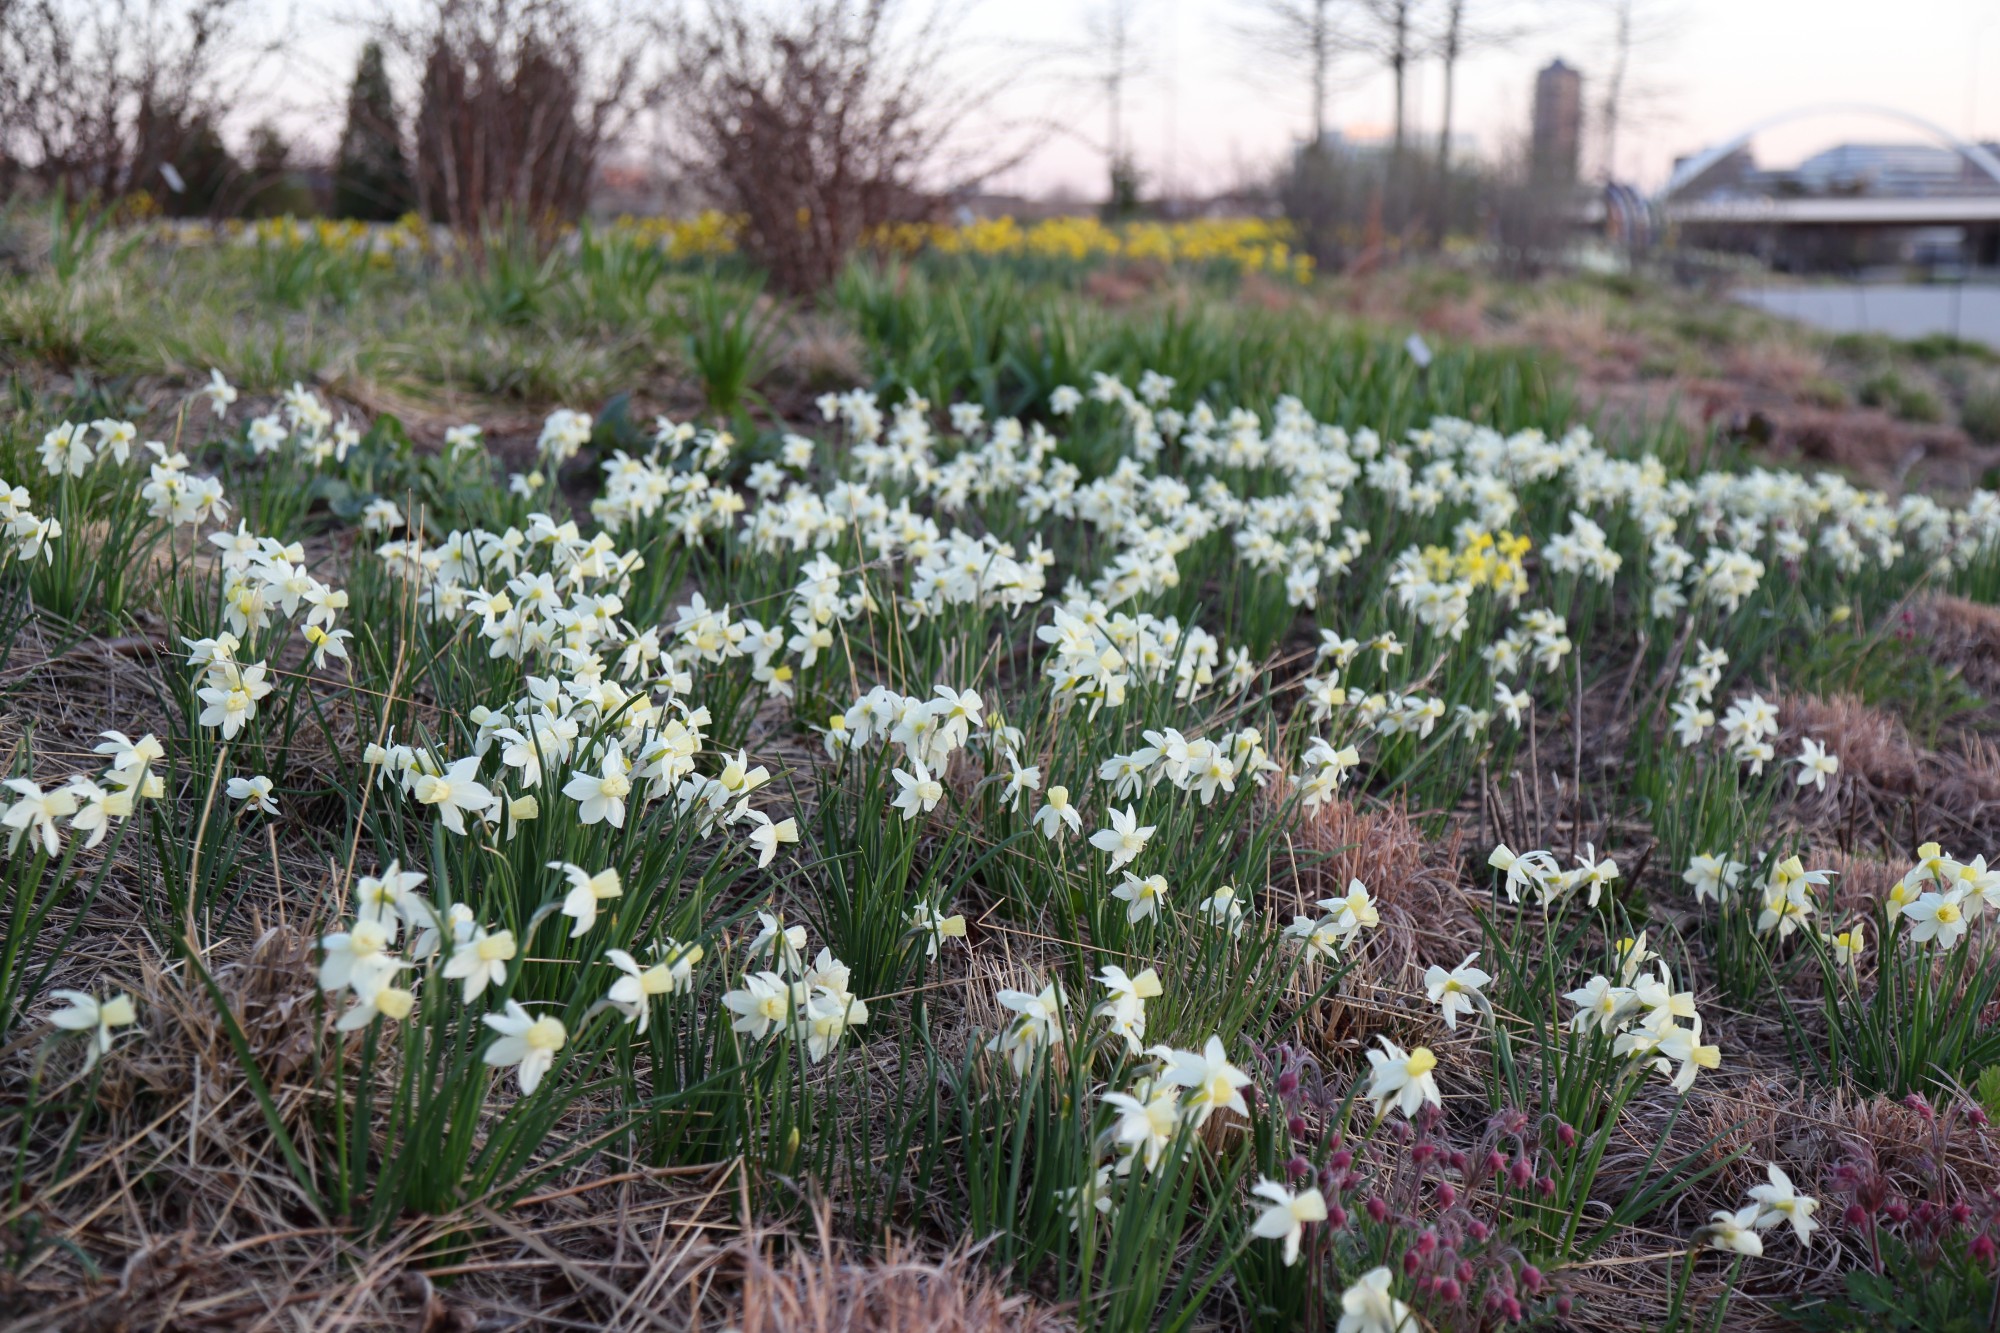 Narcissus 'Sailboat' (Sailboat daffodil) in the Lauridsen Savanna. Photo by Kelly Norris.